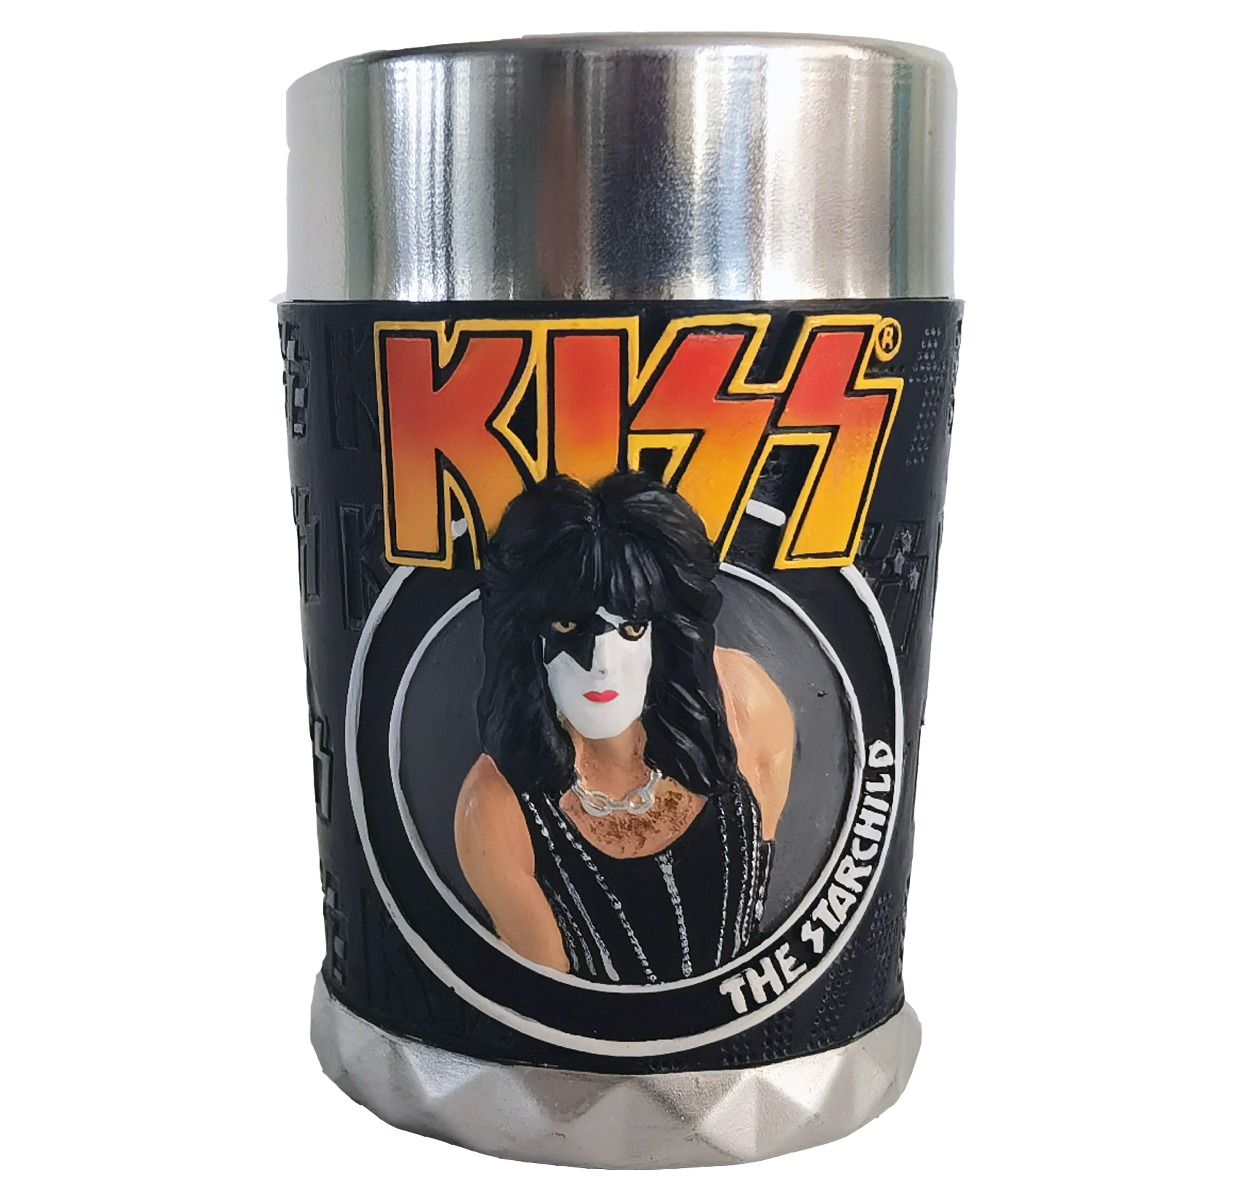 Officially Licensed KISS Flame Range The Starchild Paul Stanley Shot Glass